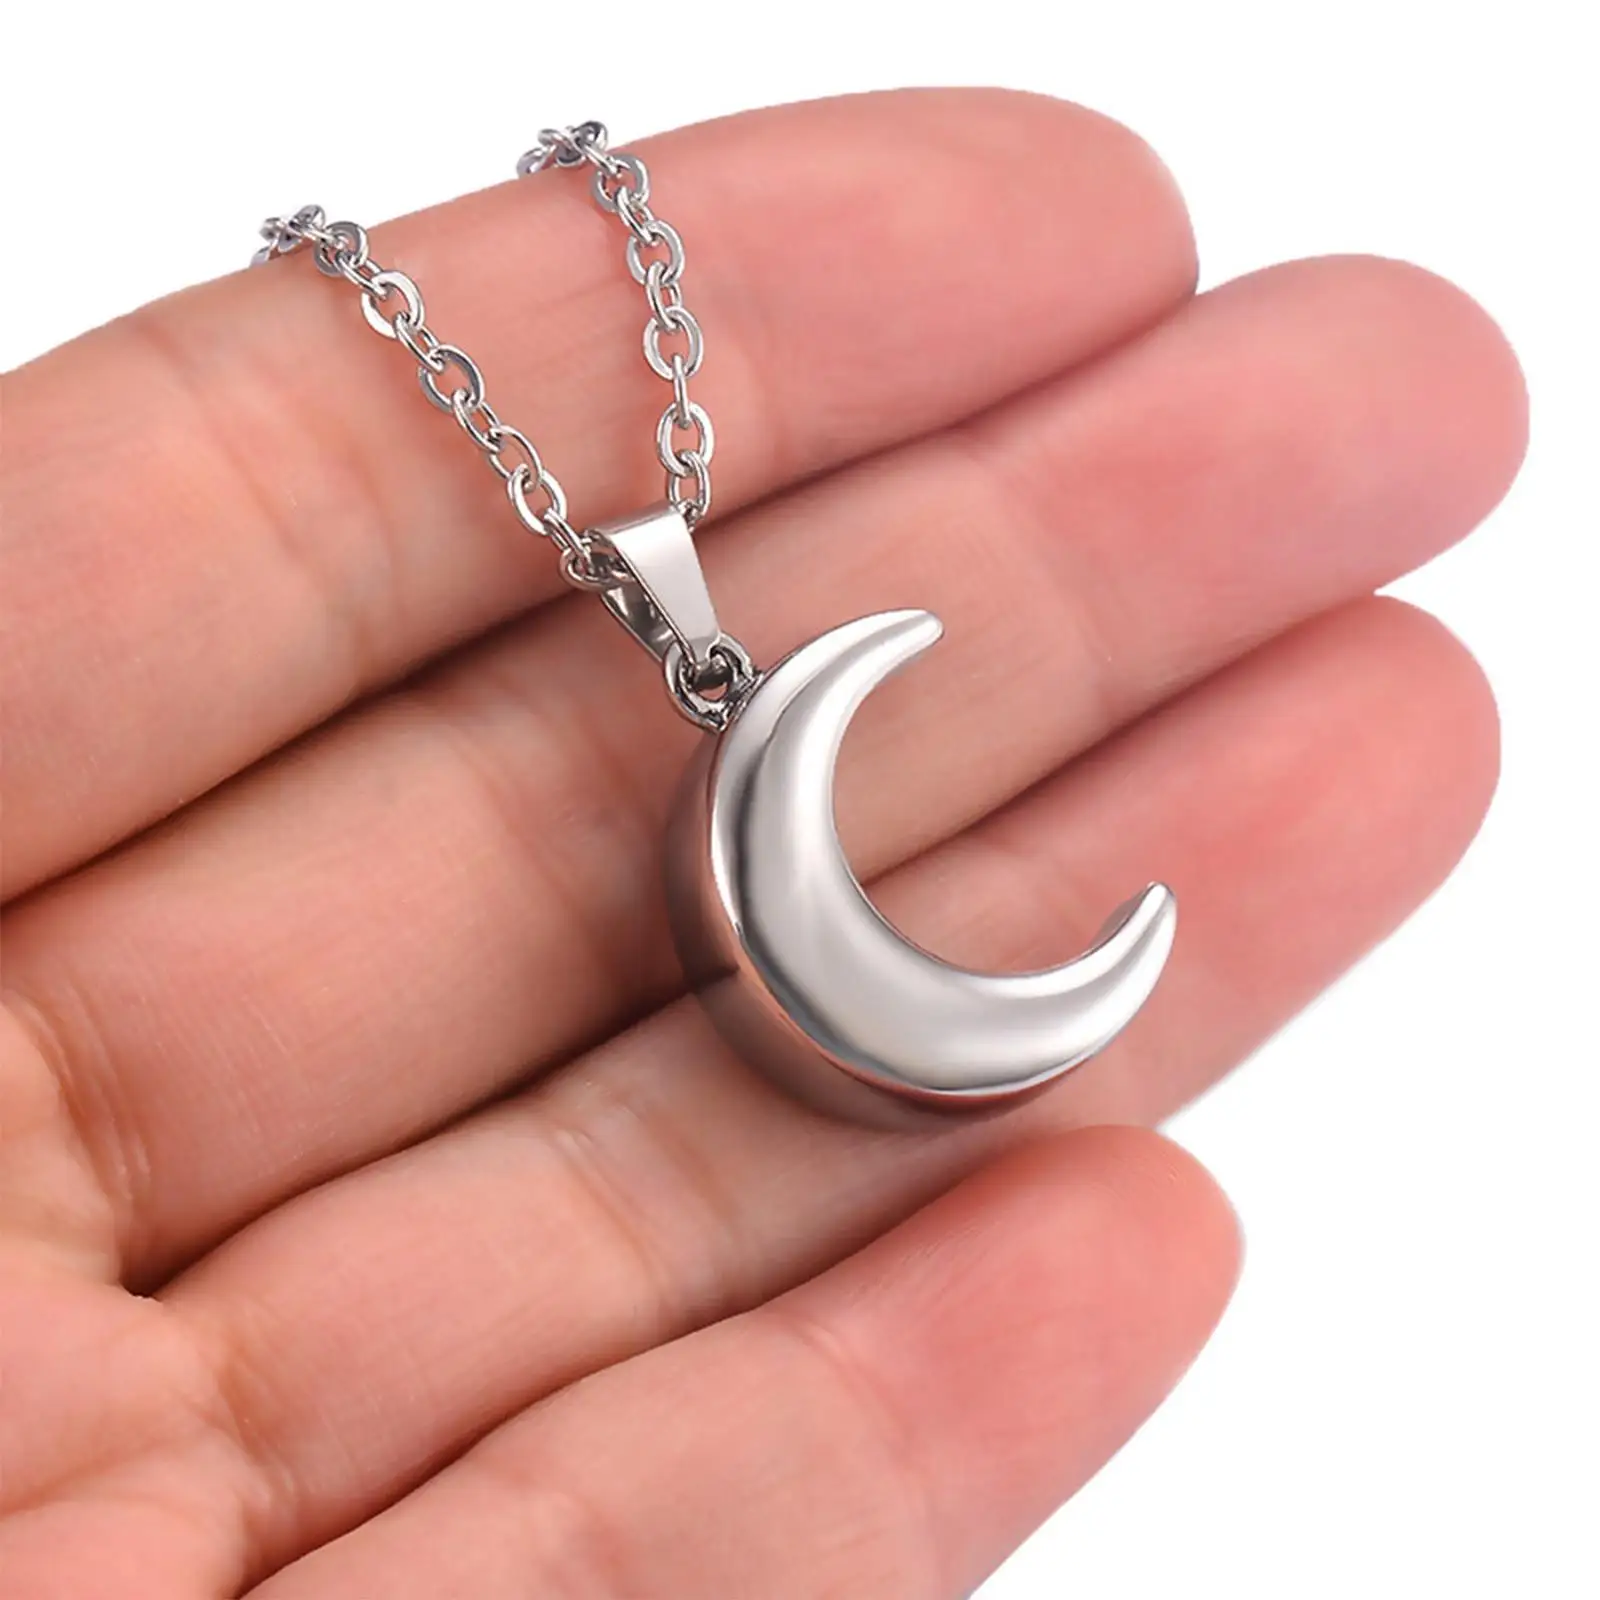 Urn Necklace Stainless Steel Jewelry Pendant for Ashes Hair Graduation Gifts